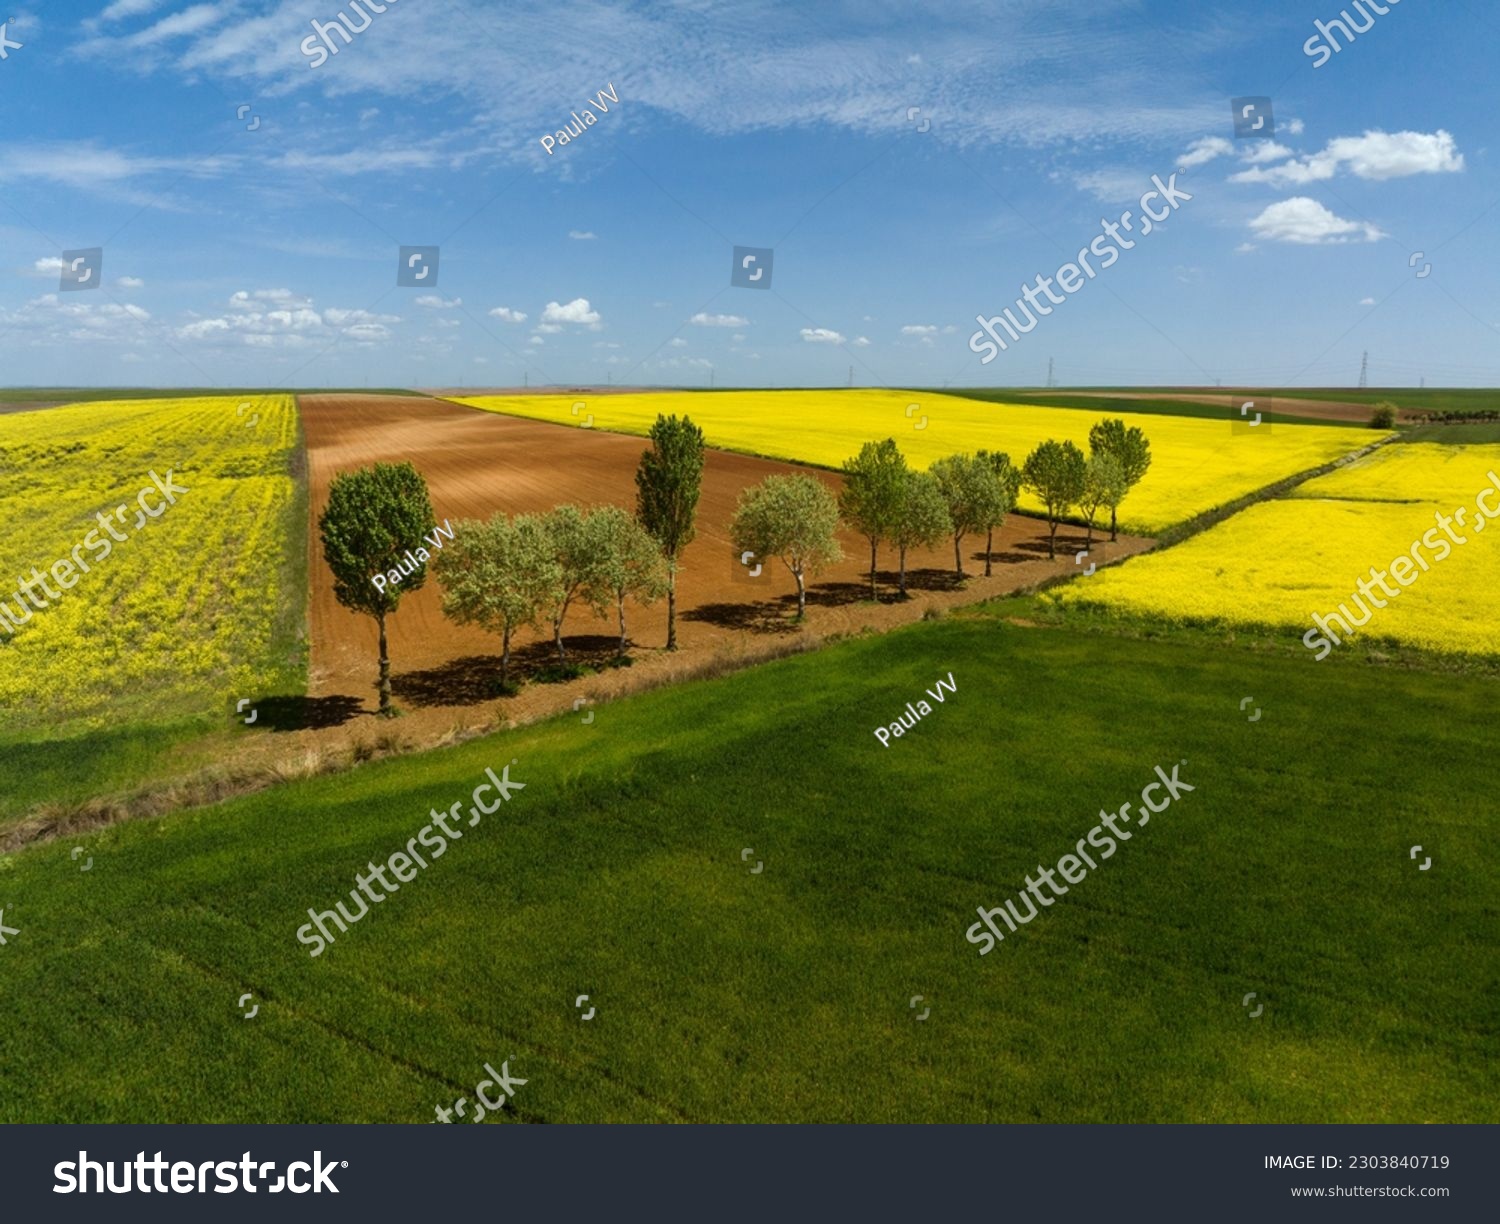 rapeseed field with aligned trees and vibrant colors in blue, yellow and green sky, for computer and mobile wallpaper. #2303840719